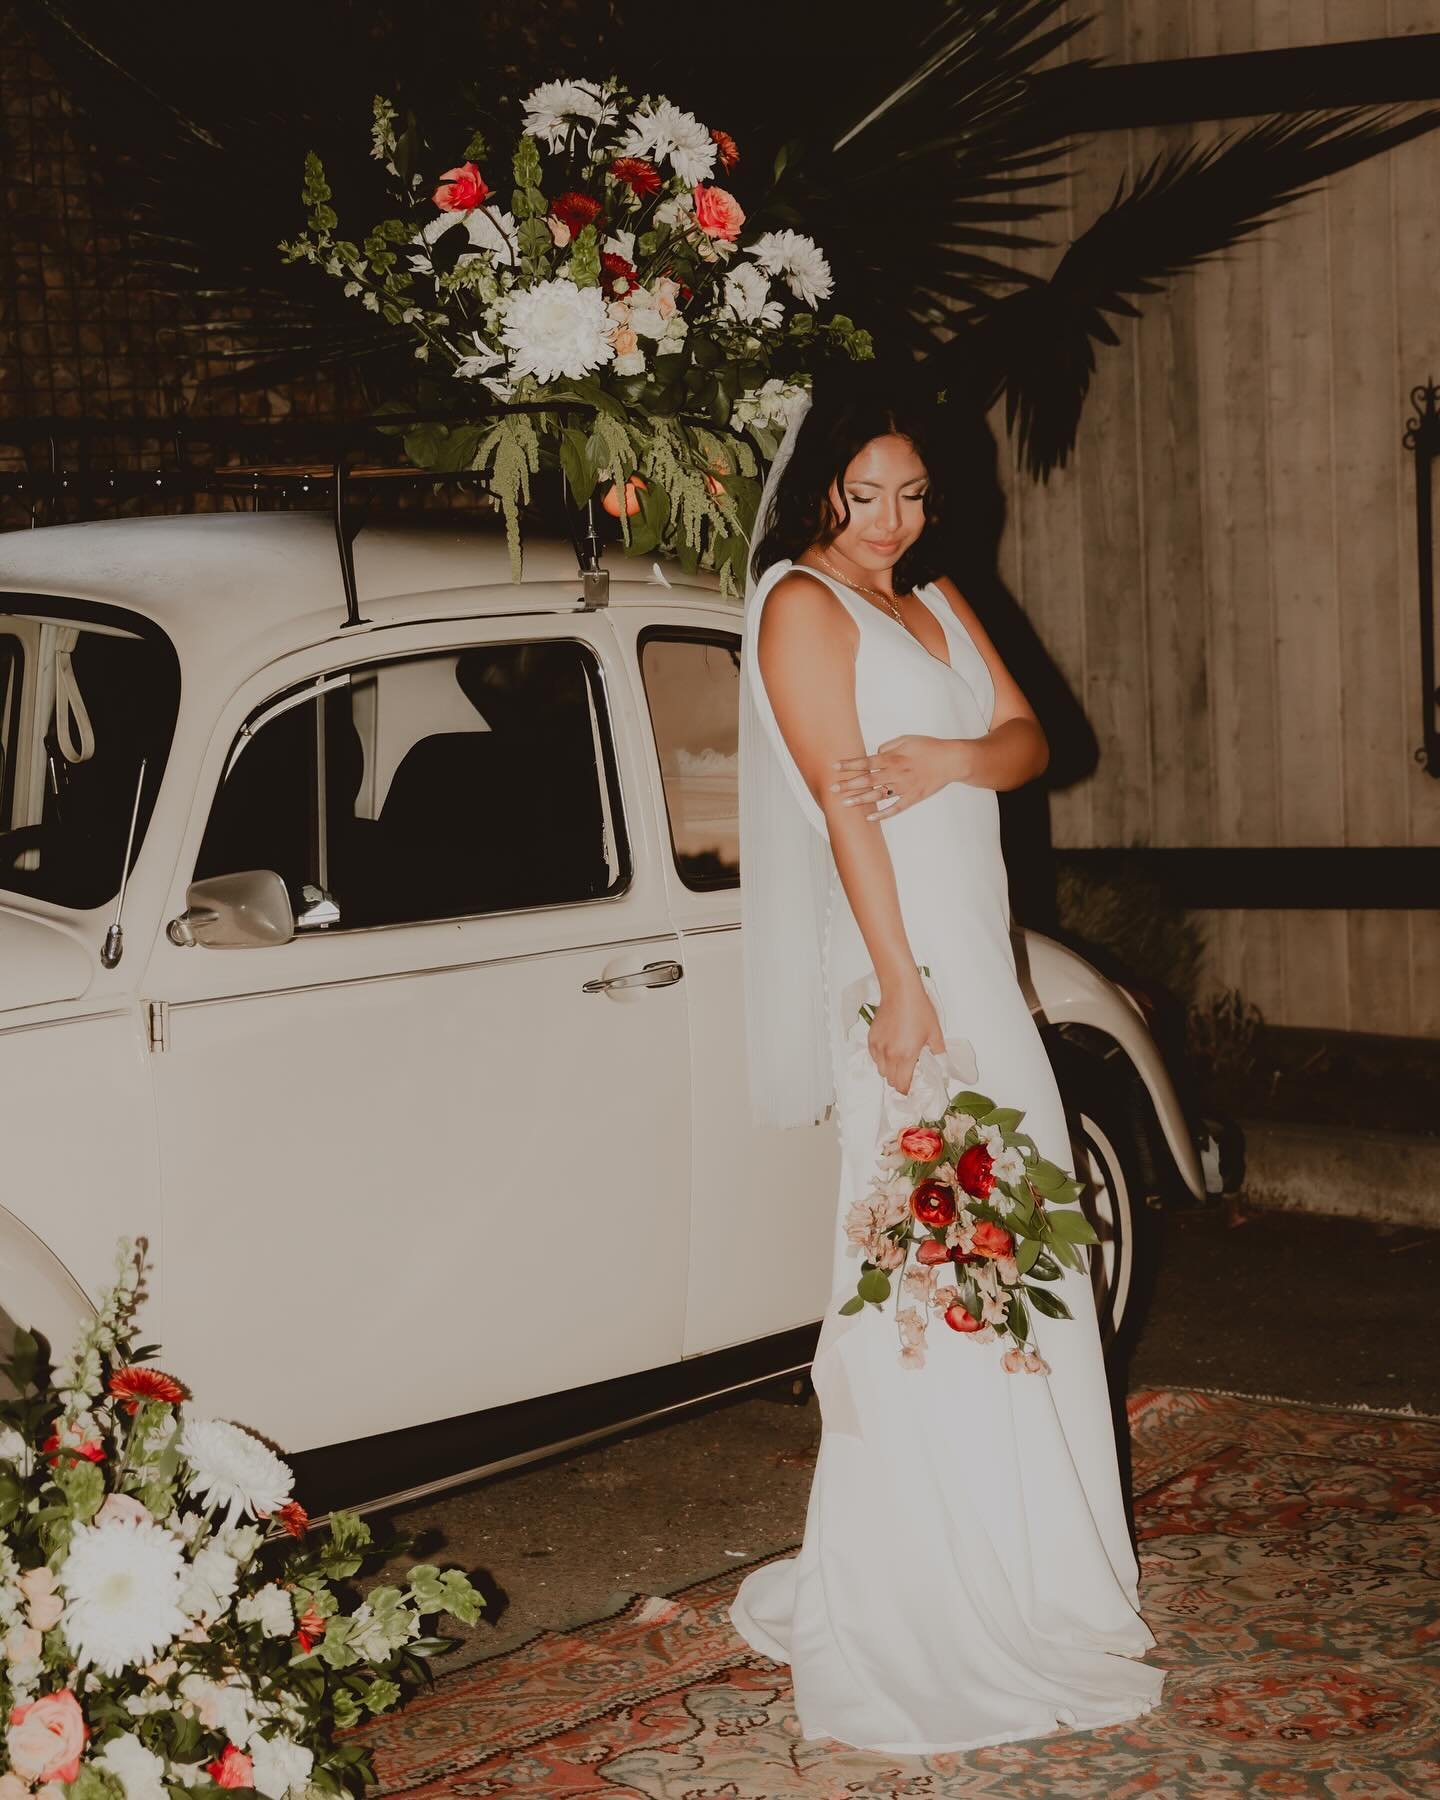 Being your wedding photographer is such a gift. 

I spent more than 15 years in restaurant management rolls and couldn&rsquo;t think of doing anything else. 

It was a work injury that landed me bed for 6 months that shifted my mindset. 

Turning my 